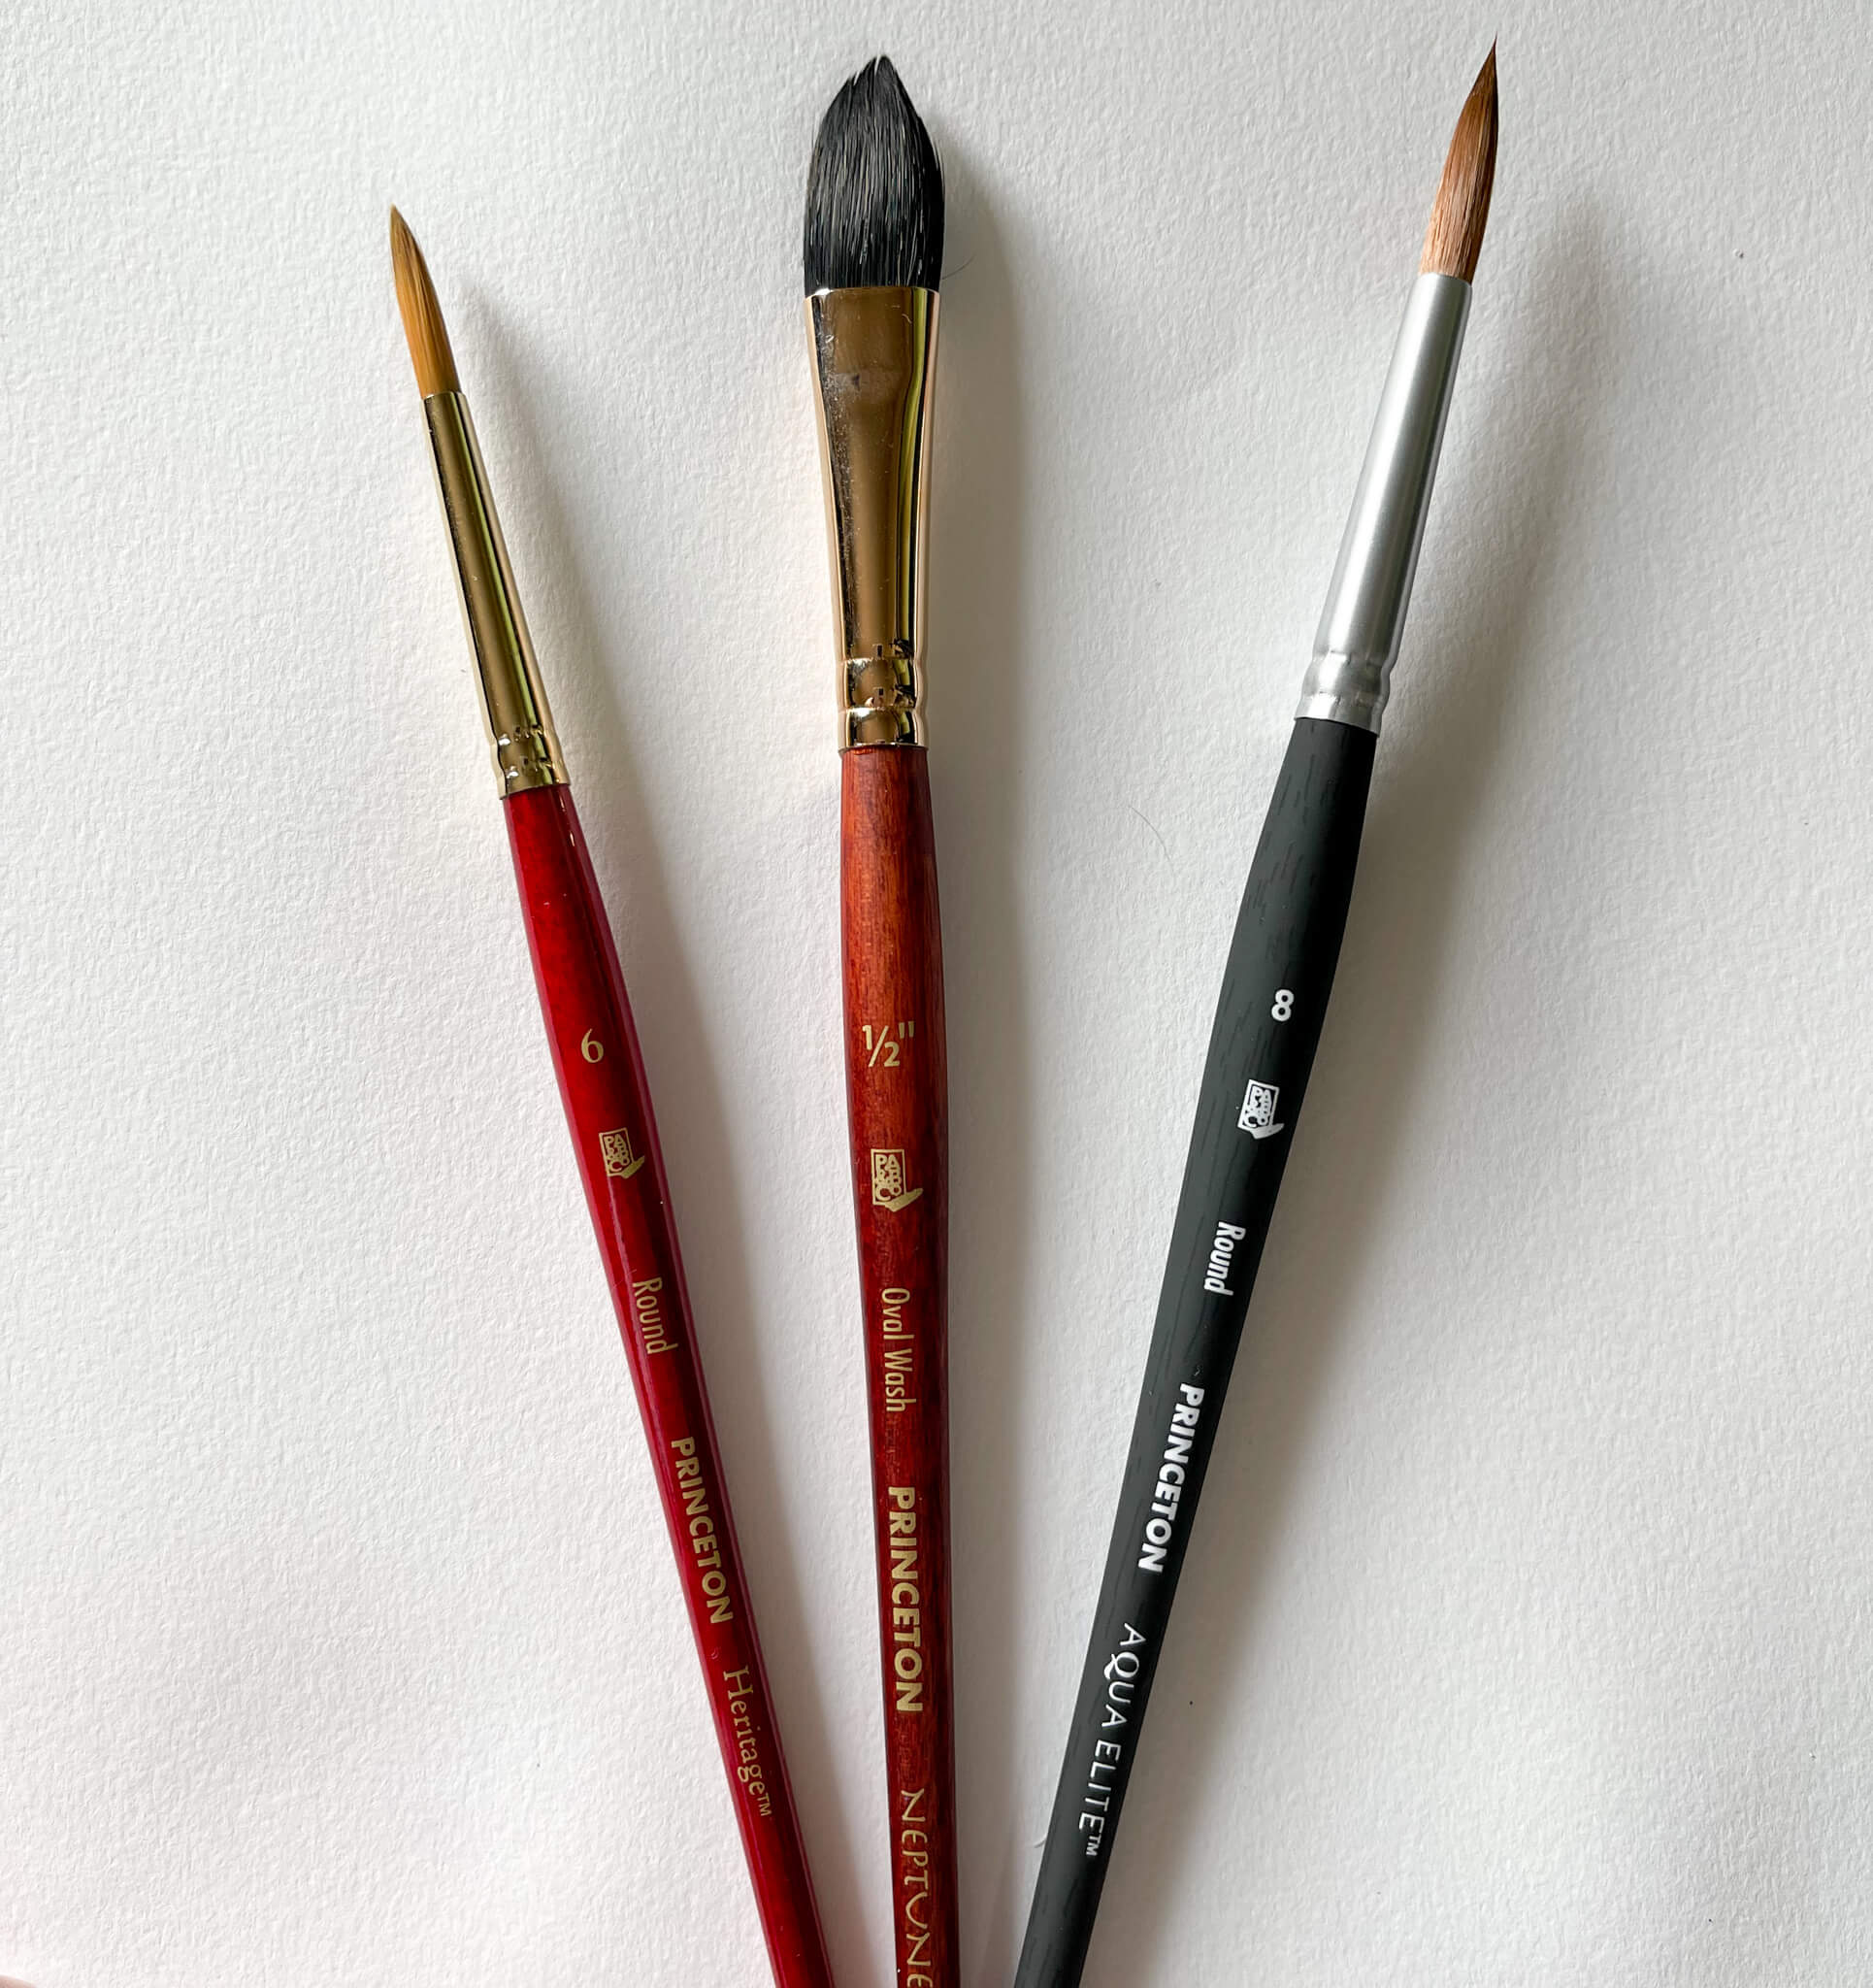 Gouache vs Watercolor: What's the Difference? - Princeton Brush Company